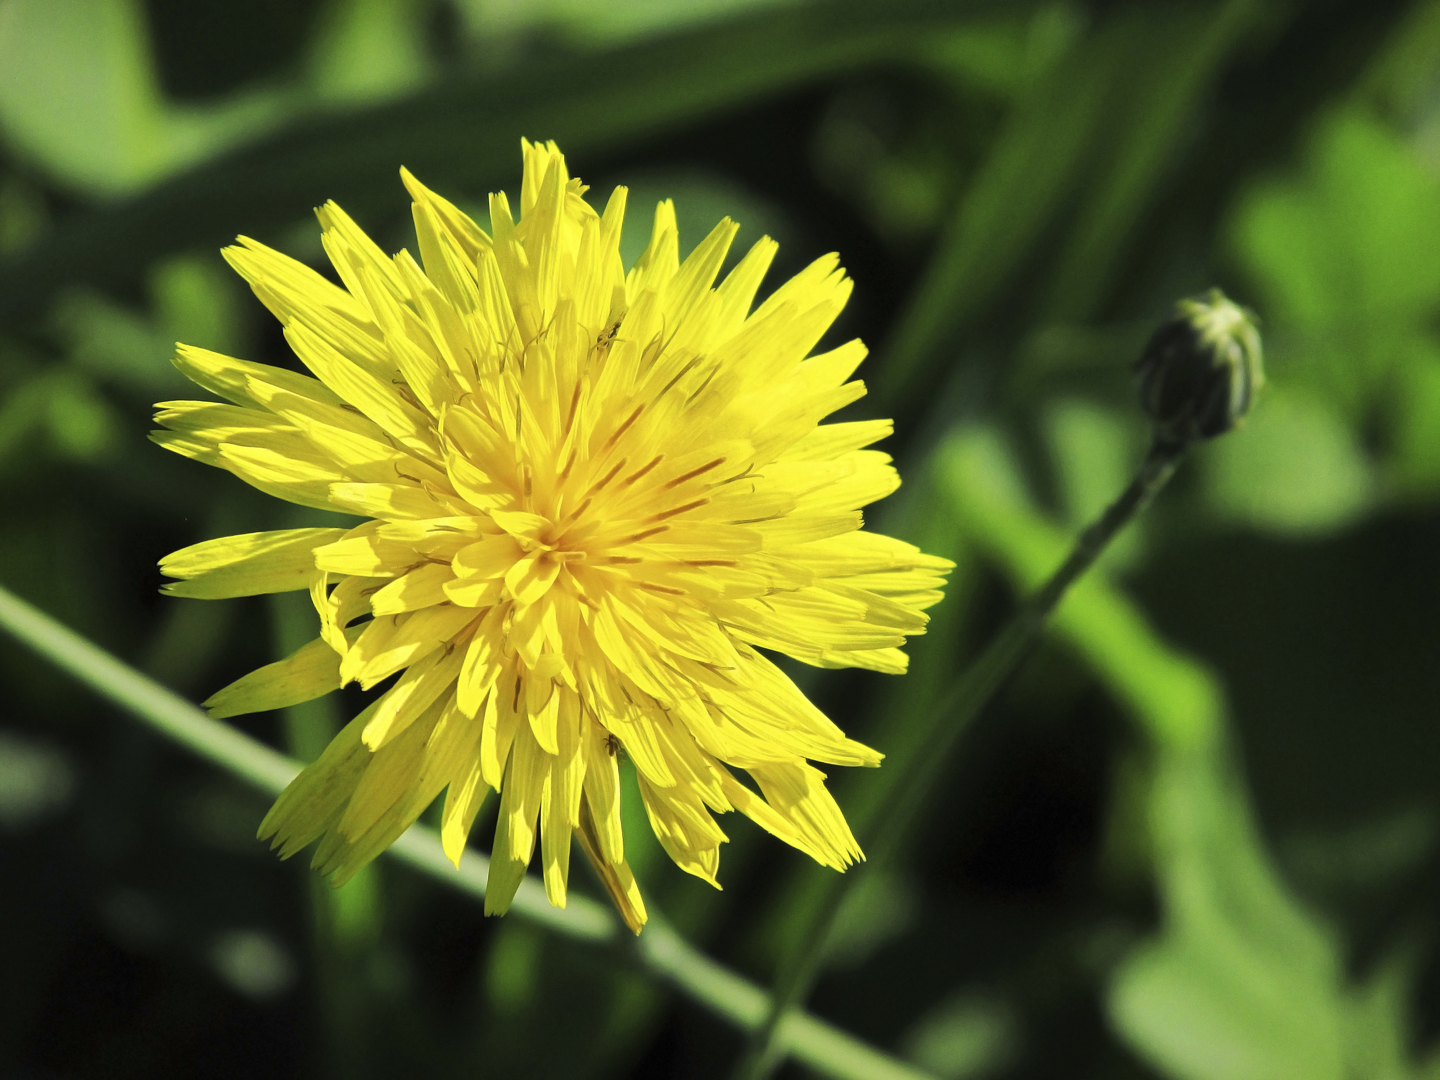 Macro photo of a yellow dandelion and a bud.